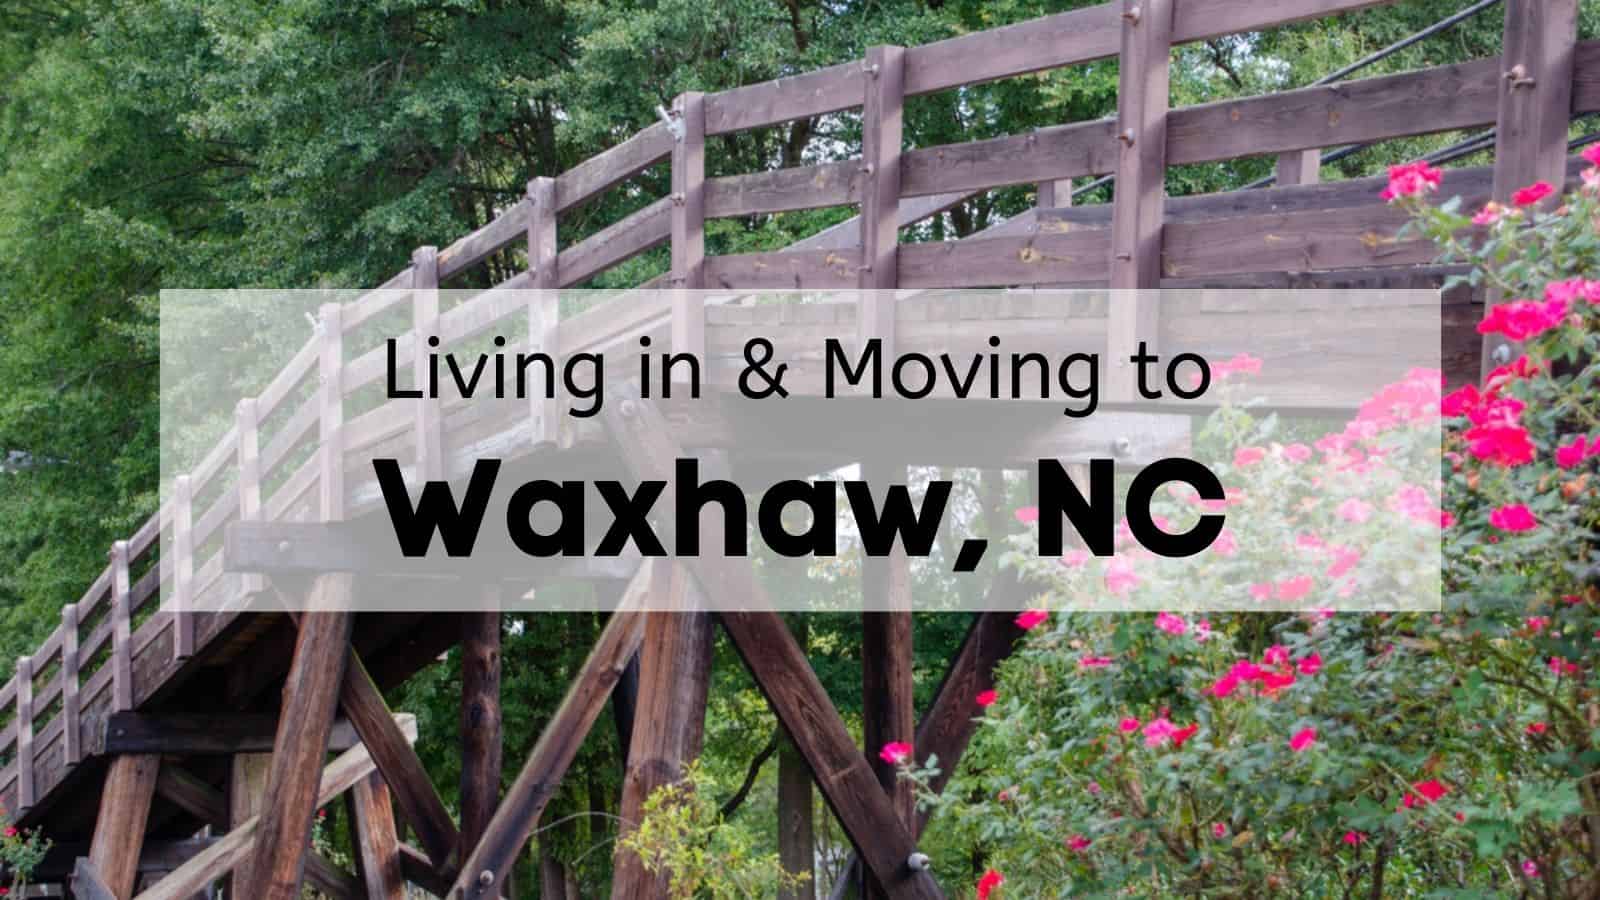 Living in & Moving to Waxhaw, NC